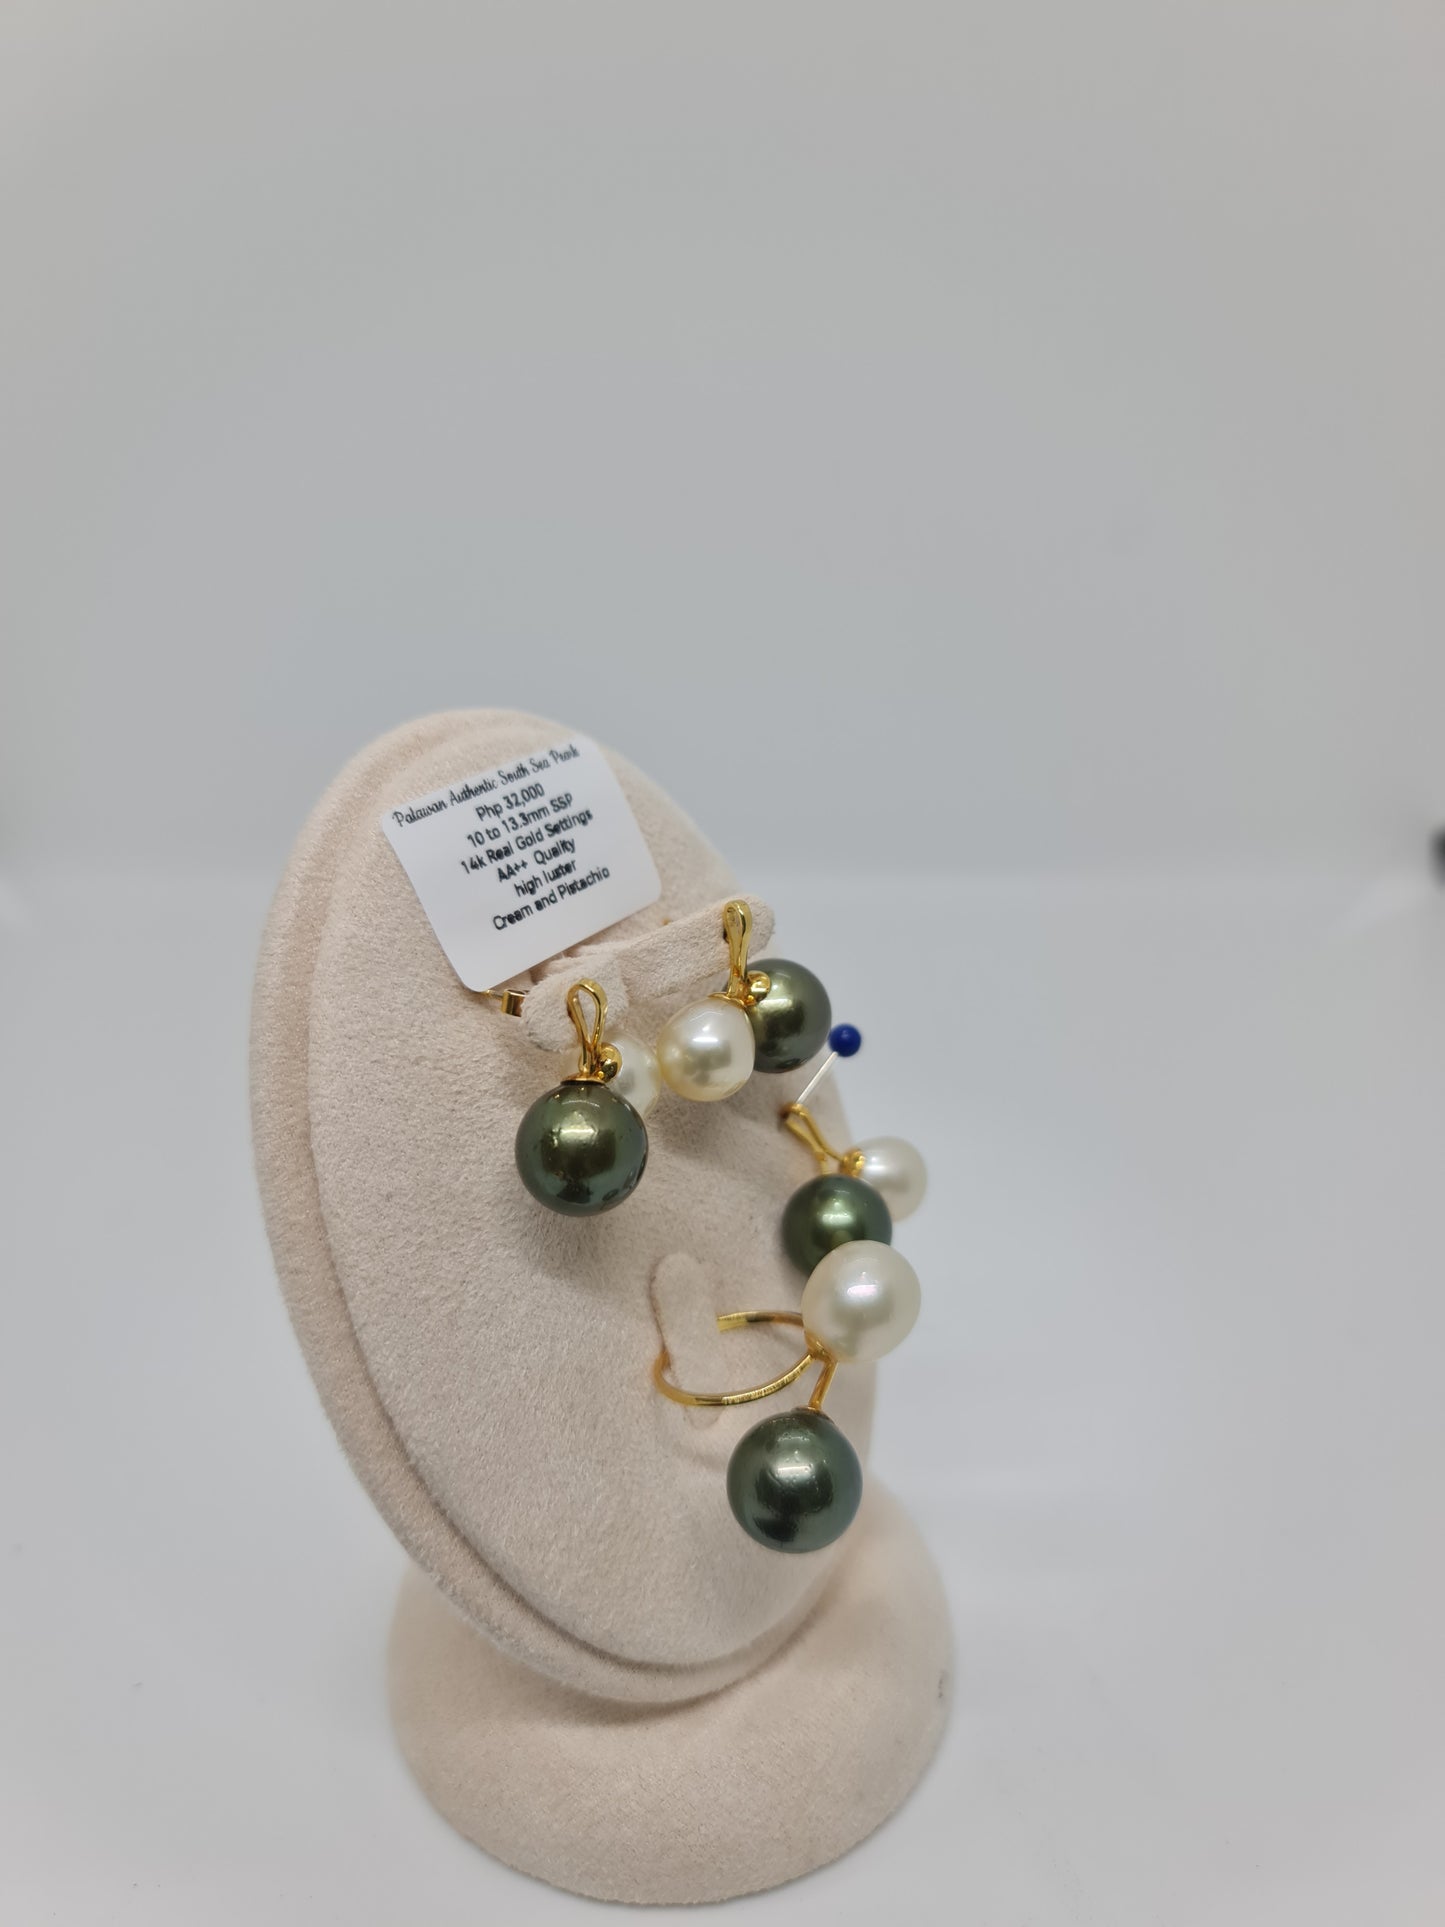 10.3mm to 13.3mm Creamy & Pistachio Green South Sea Pearls Set in 14K Gold